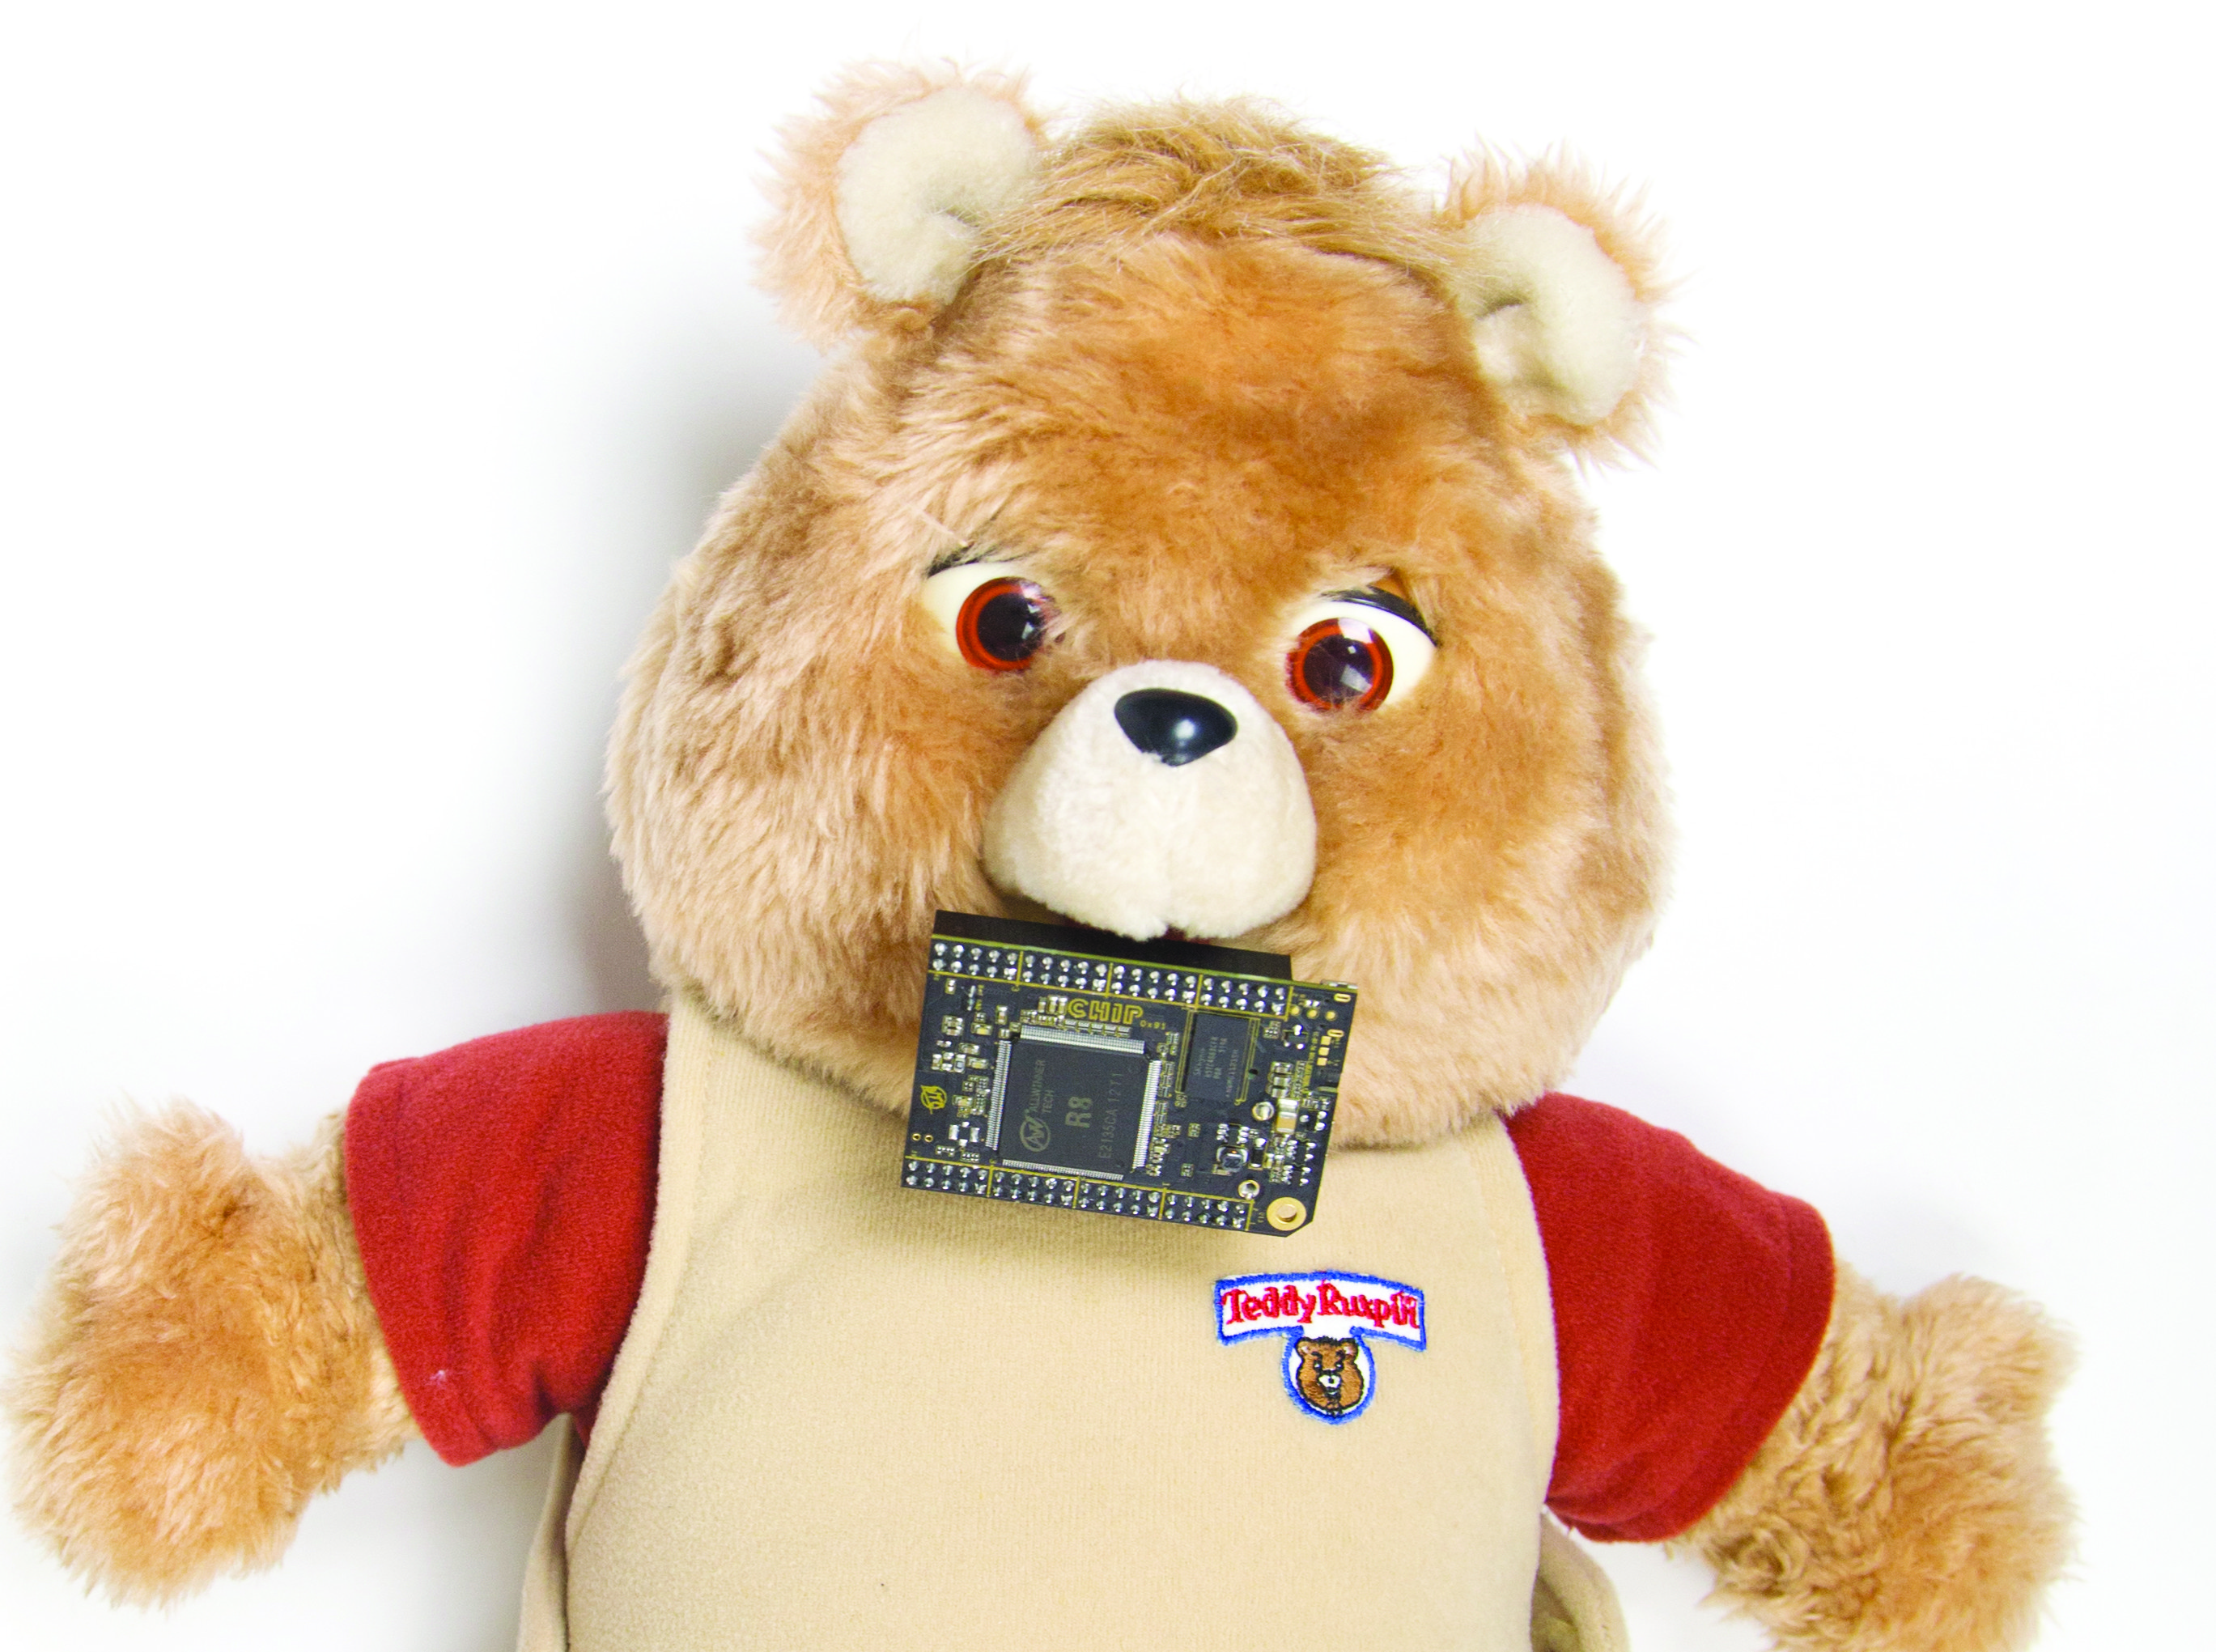 Hack a Teddy Ruxpin to Say Everything You Type or Tweet